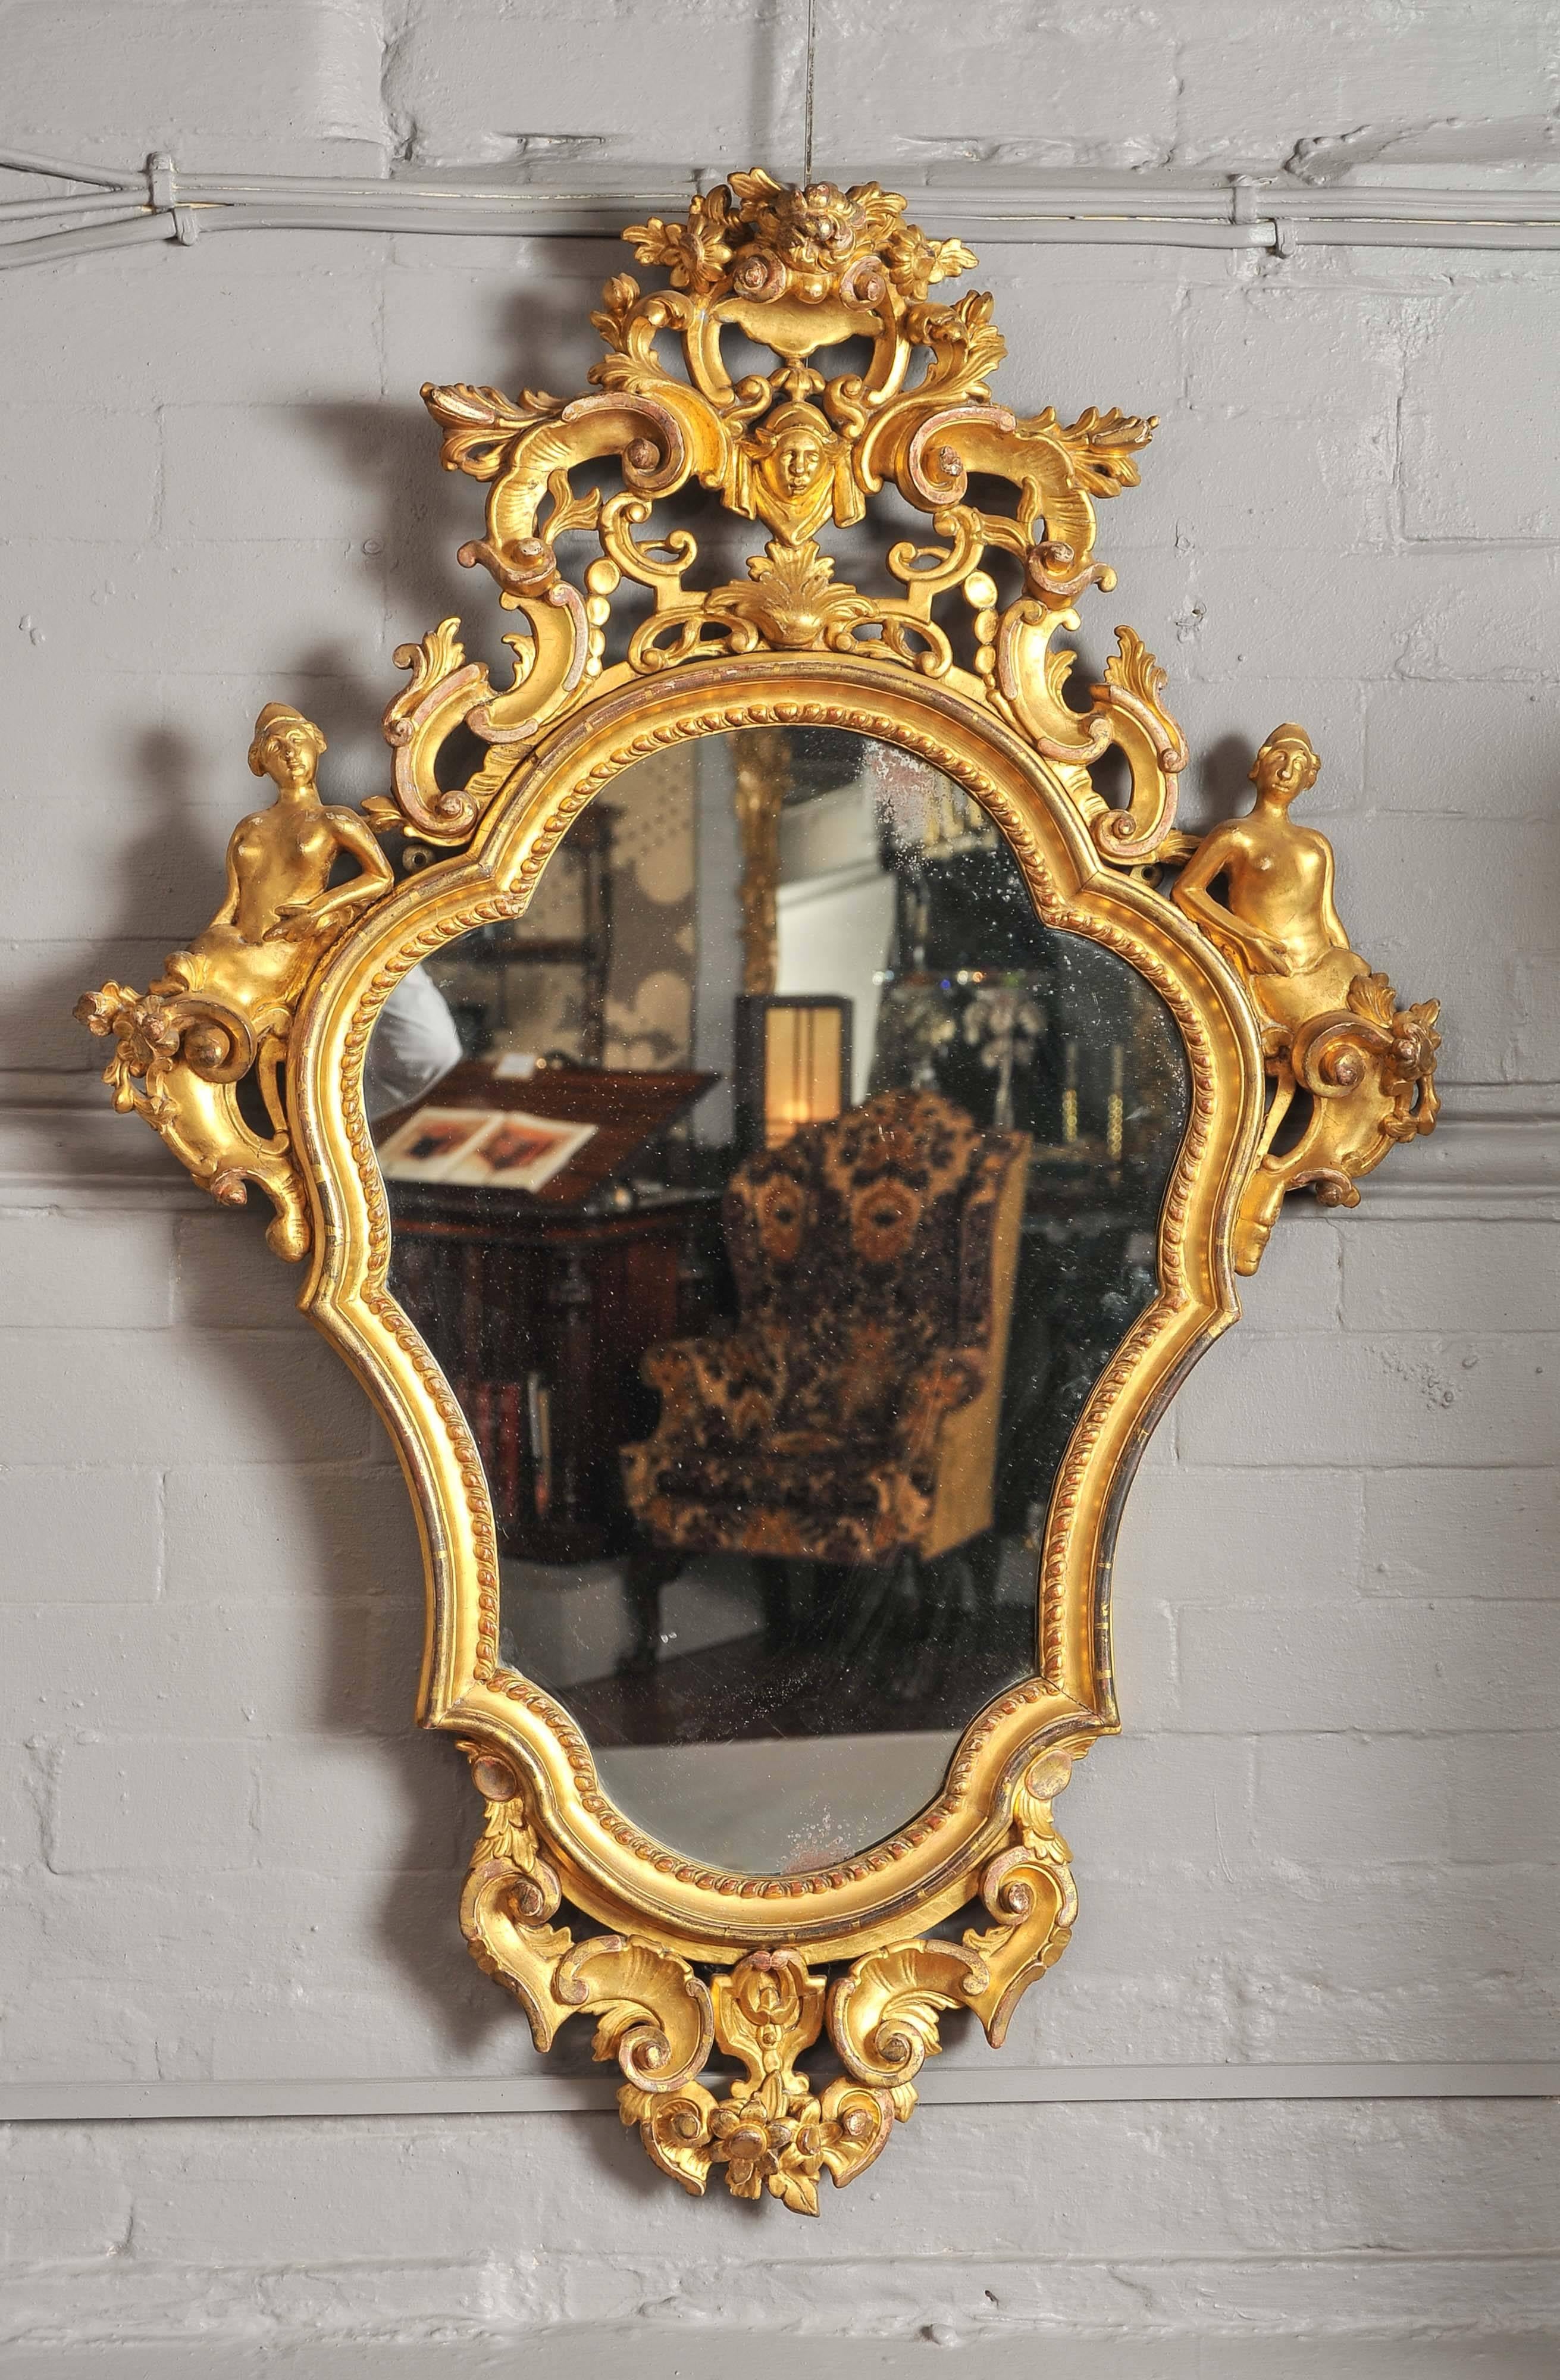 The shaped frame with profuse carving top and bottom containing figures, masks, flowers and scrolls.
This beautiful example with rich gold color retains its original gilding and glass plate.